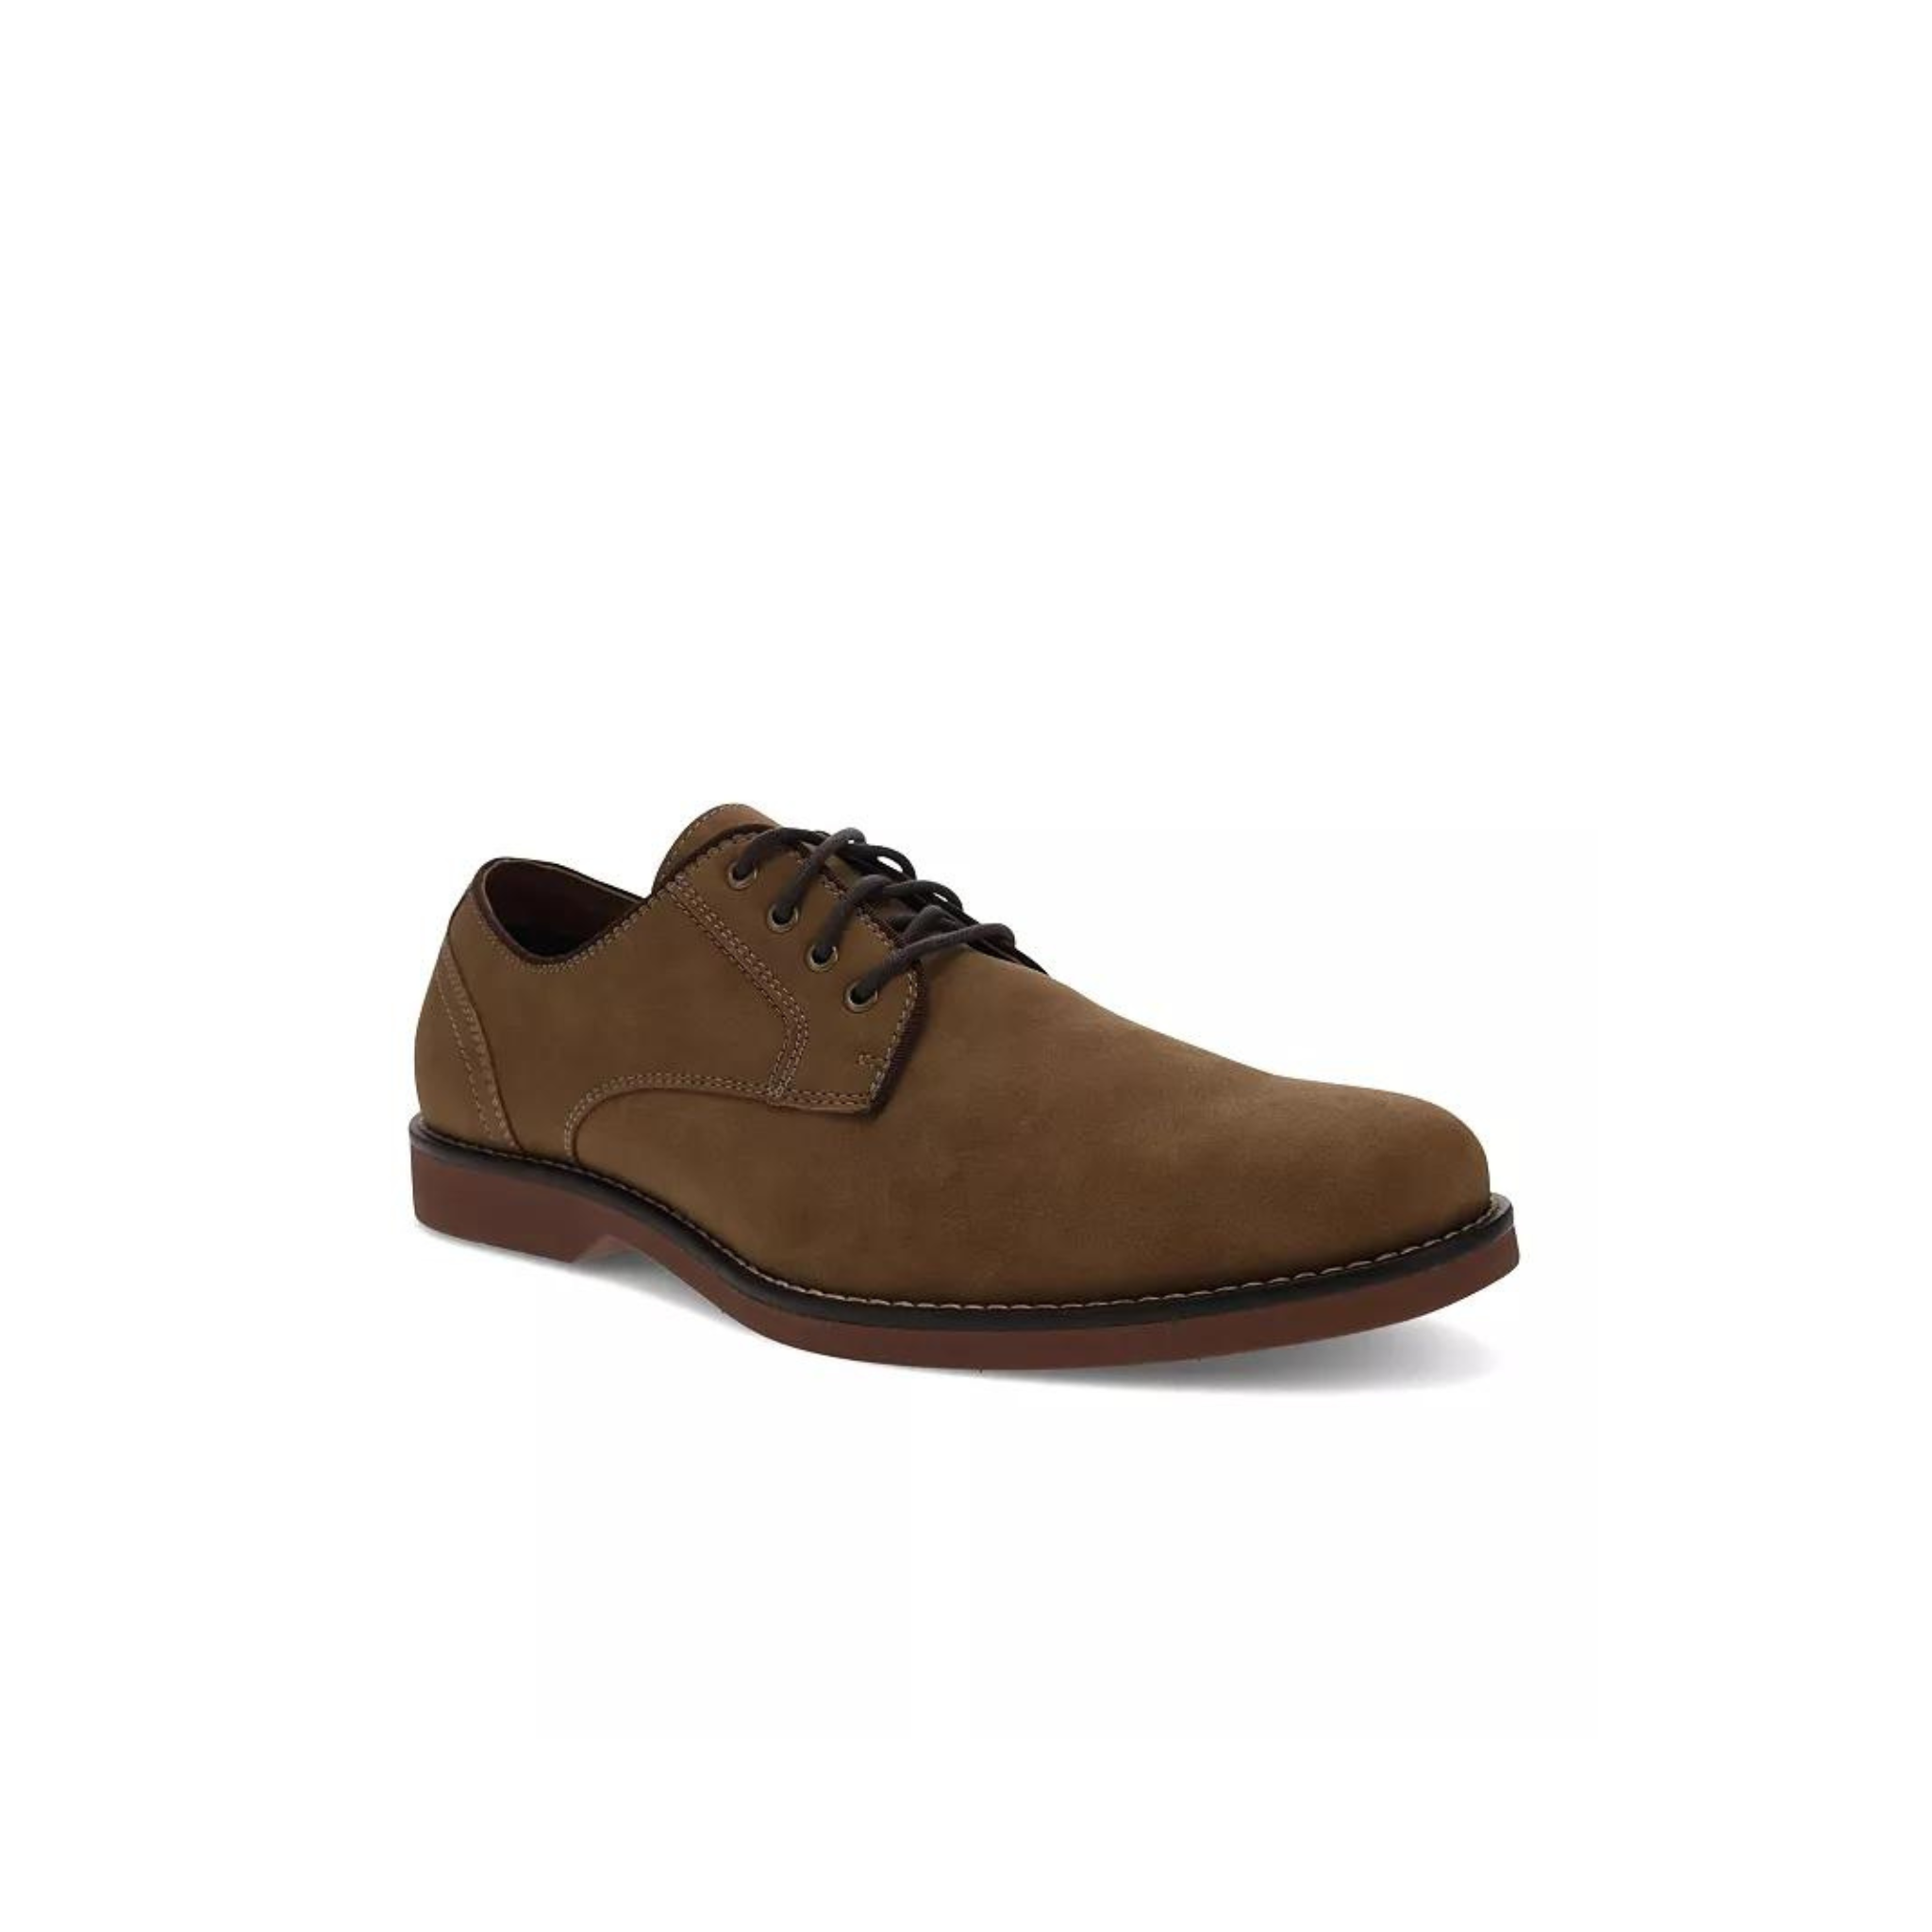 Dockers Men's Pryce Casual Oxford Shoes